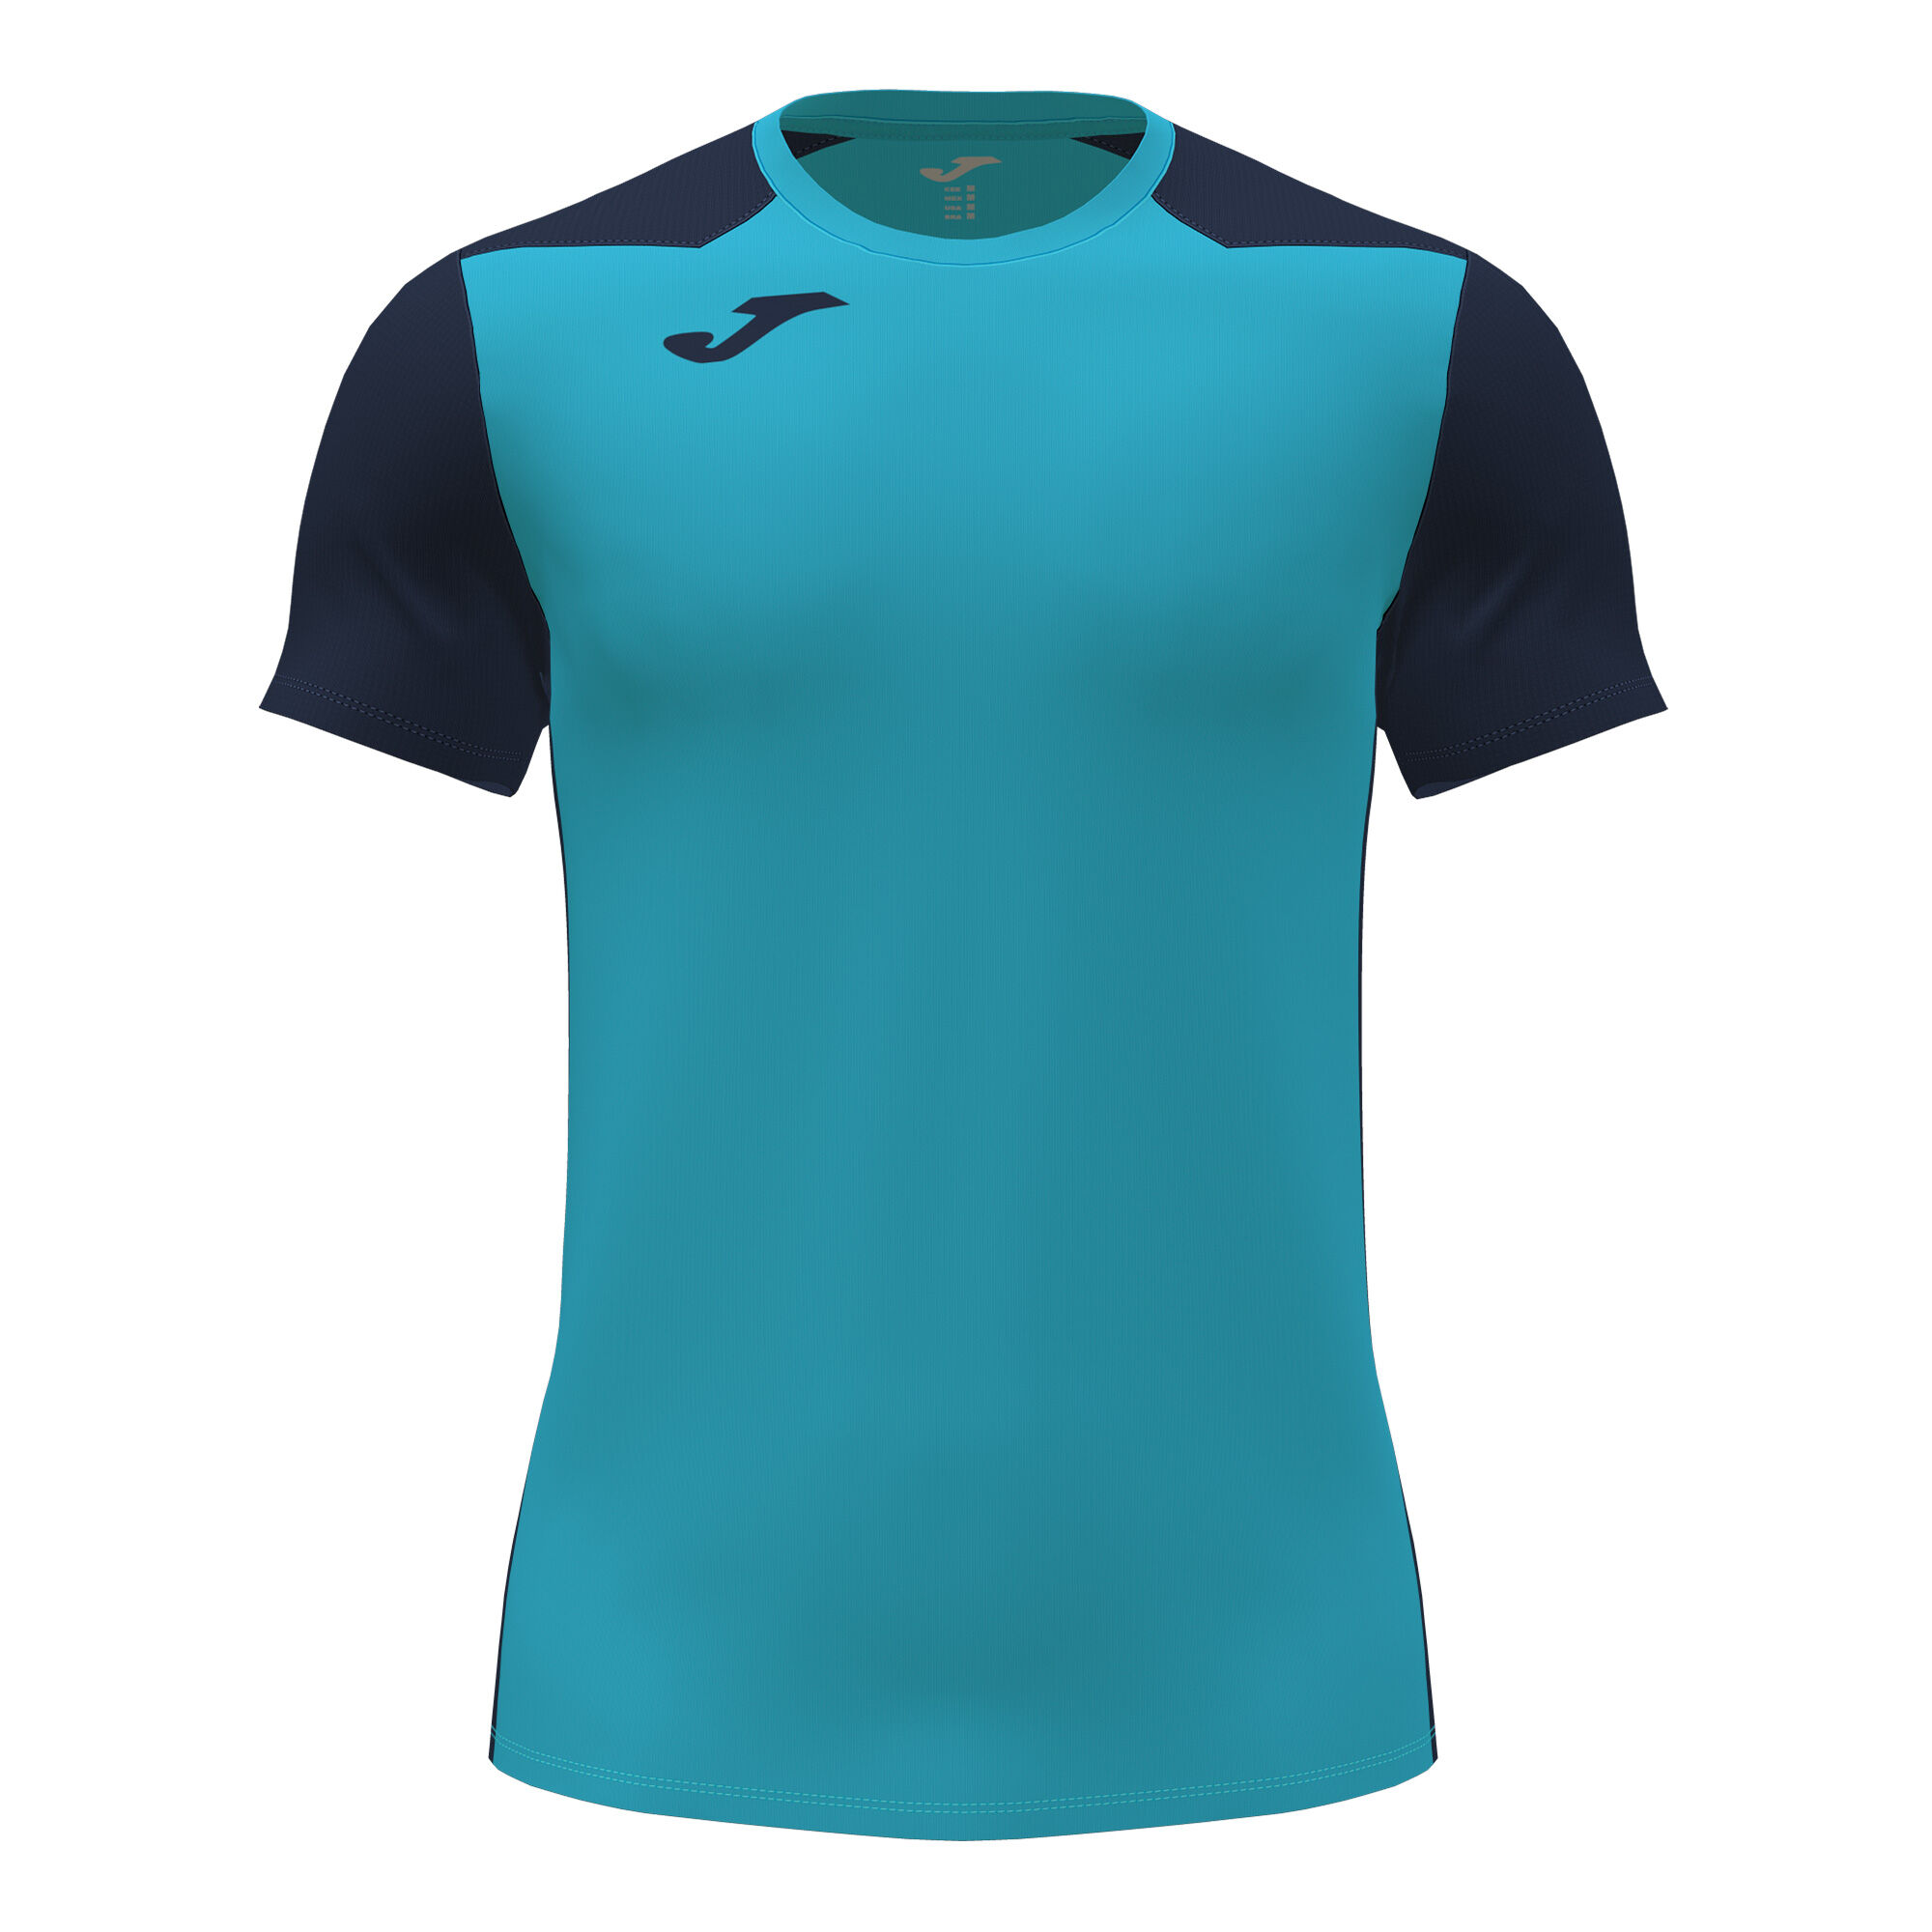 MAILLOT MANCHES COURTES HOMME RECORD II TURQUOISE FLUO BLEU MARINE